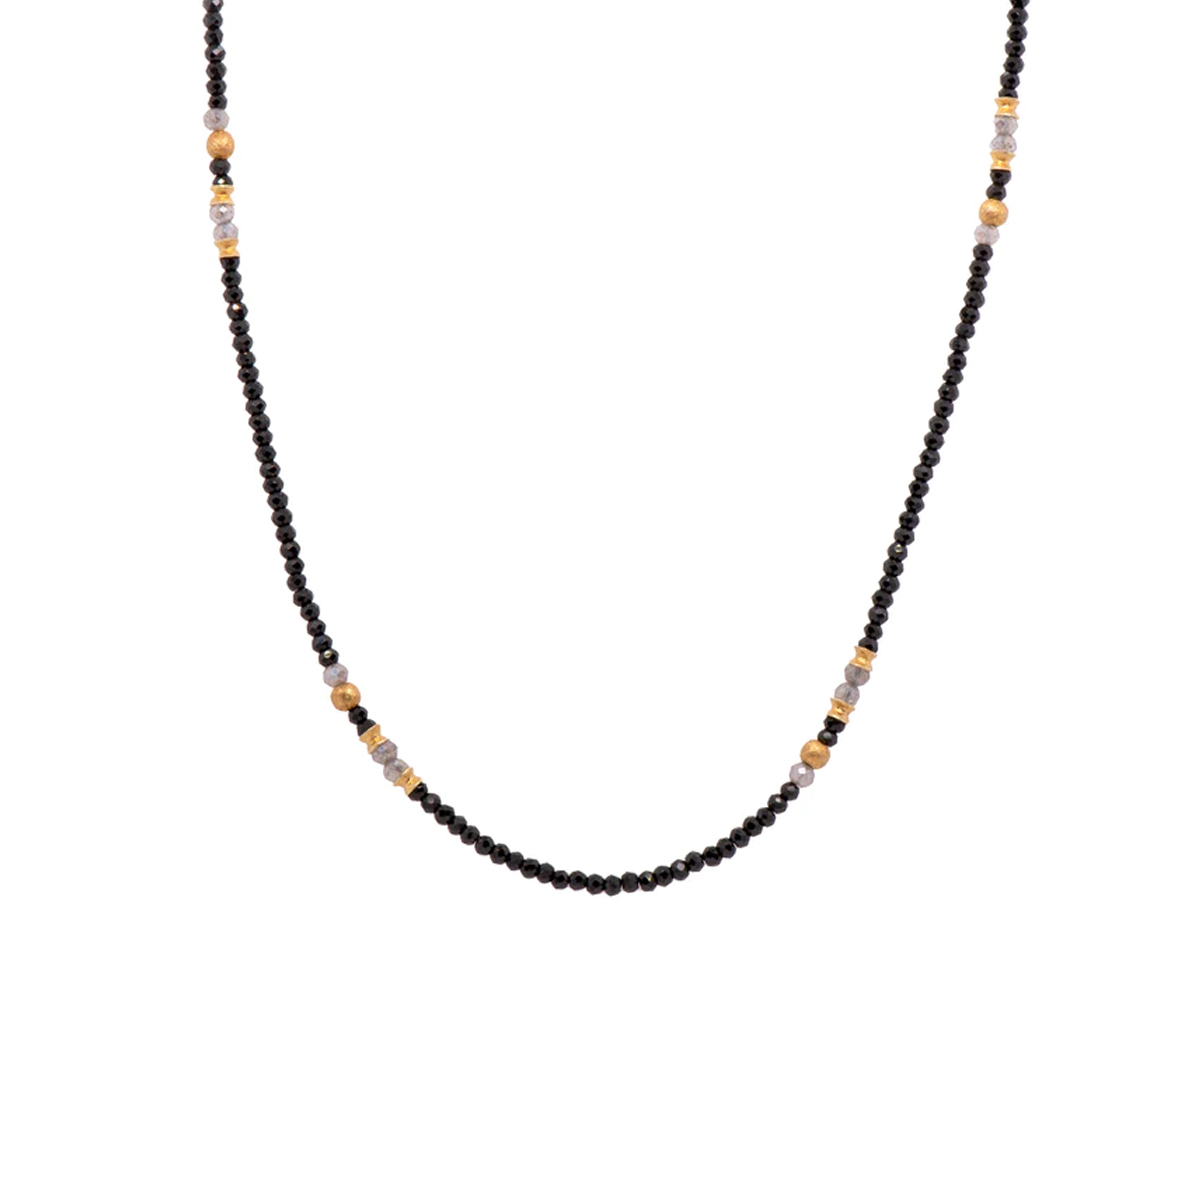 24K Gold Plated Sterling Silver Black Spinel and Labradorite Necklace